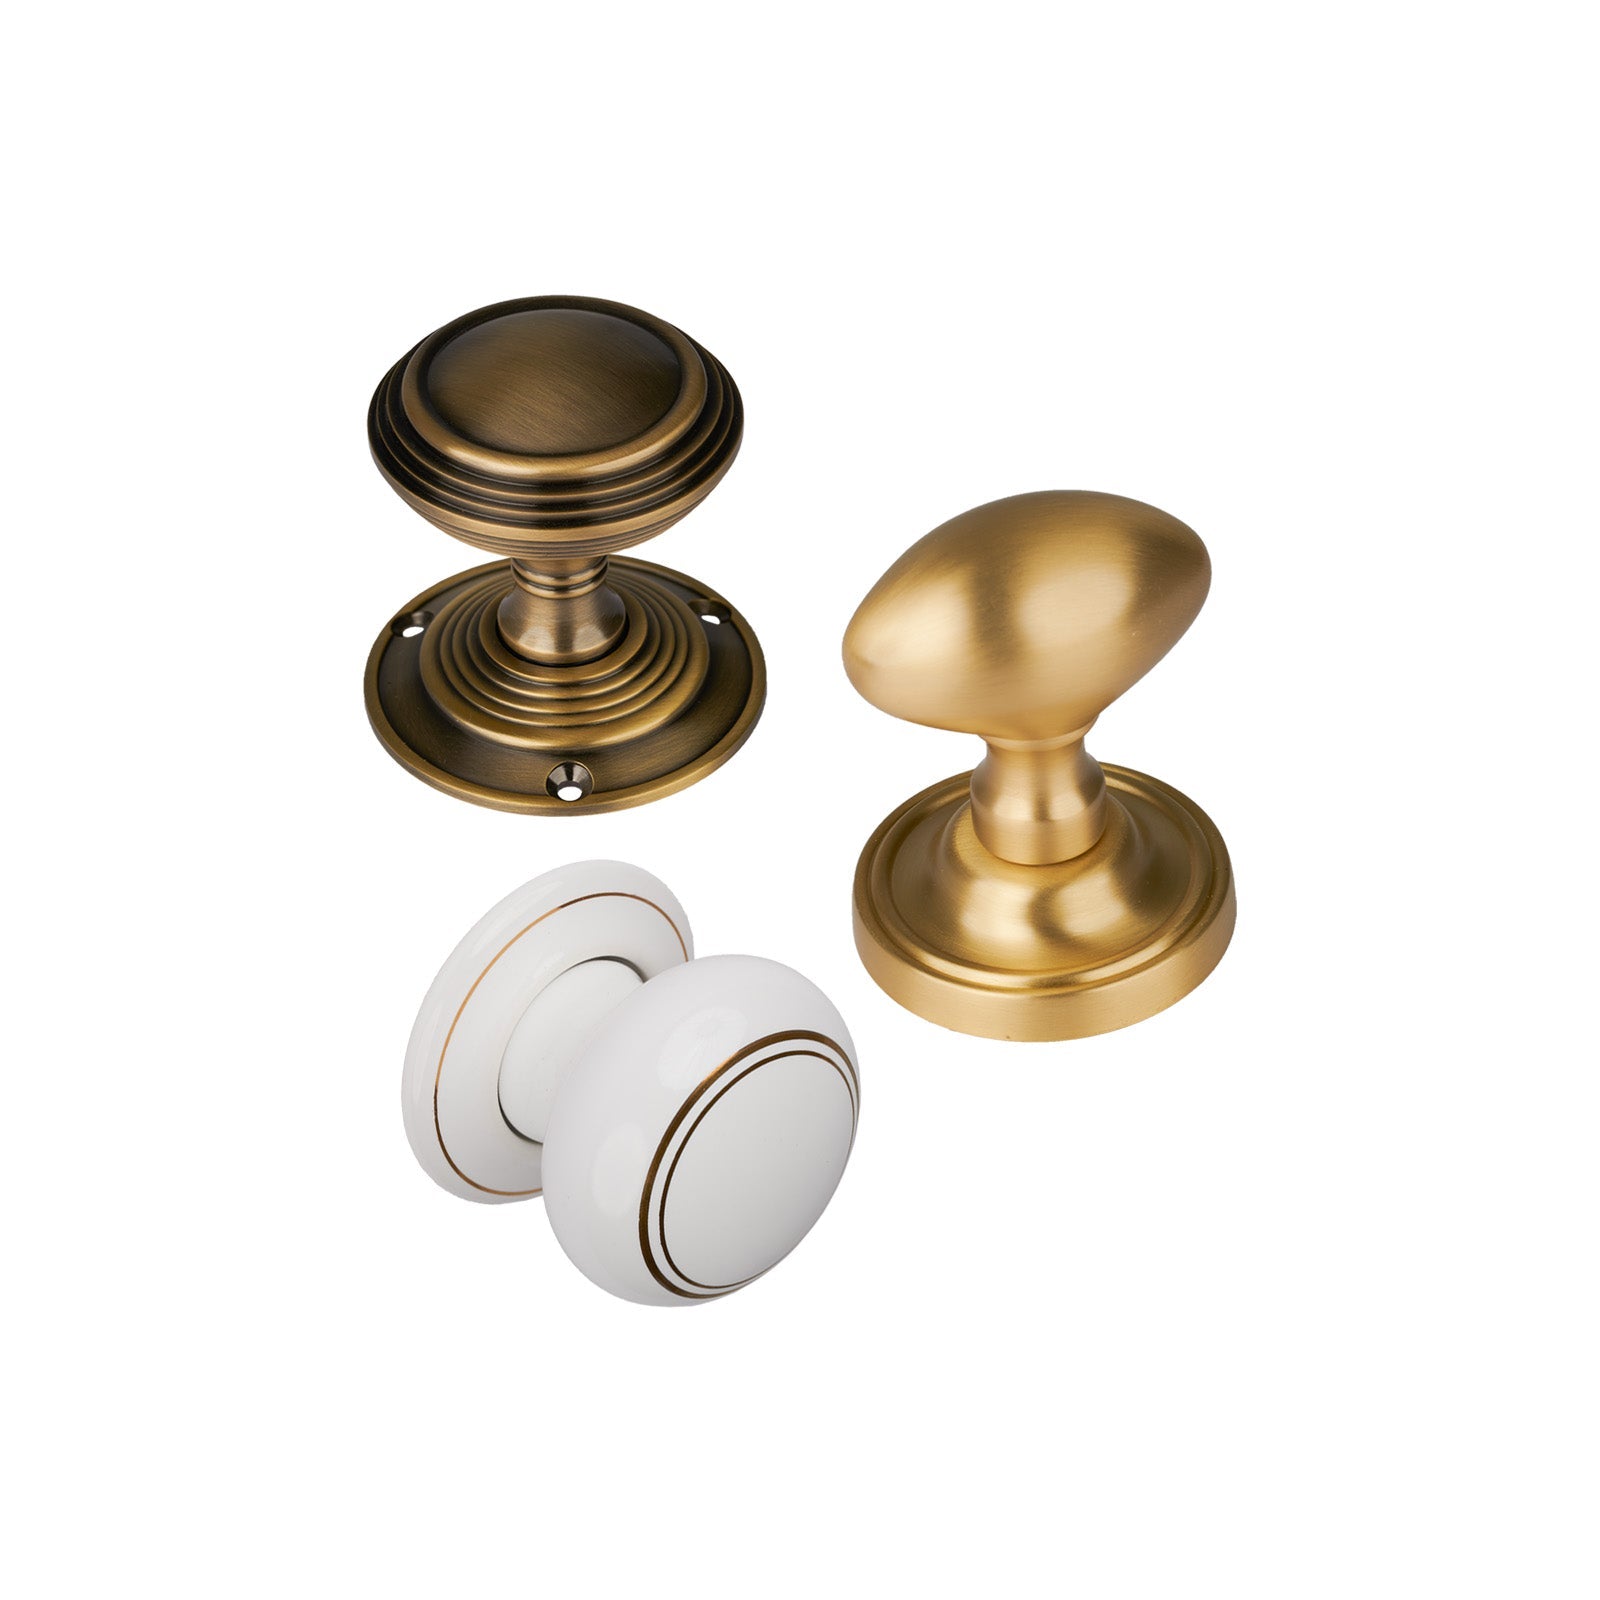 Collection Image of New M Marcus Door Knobs